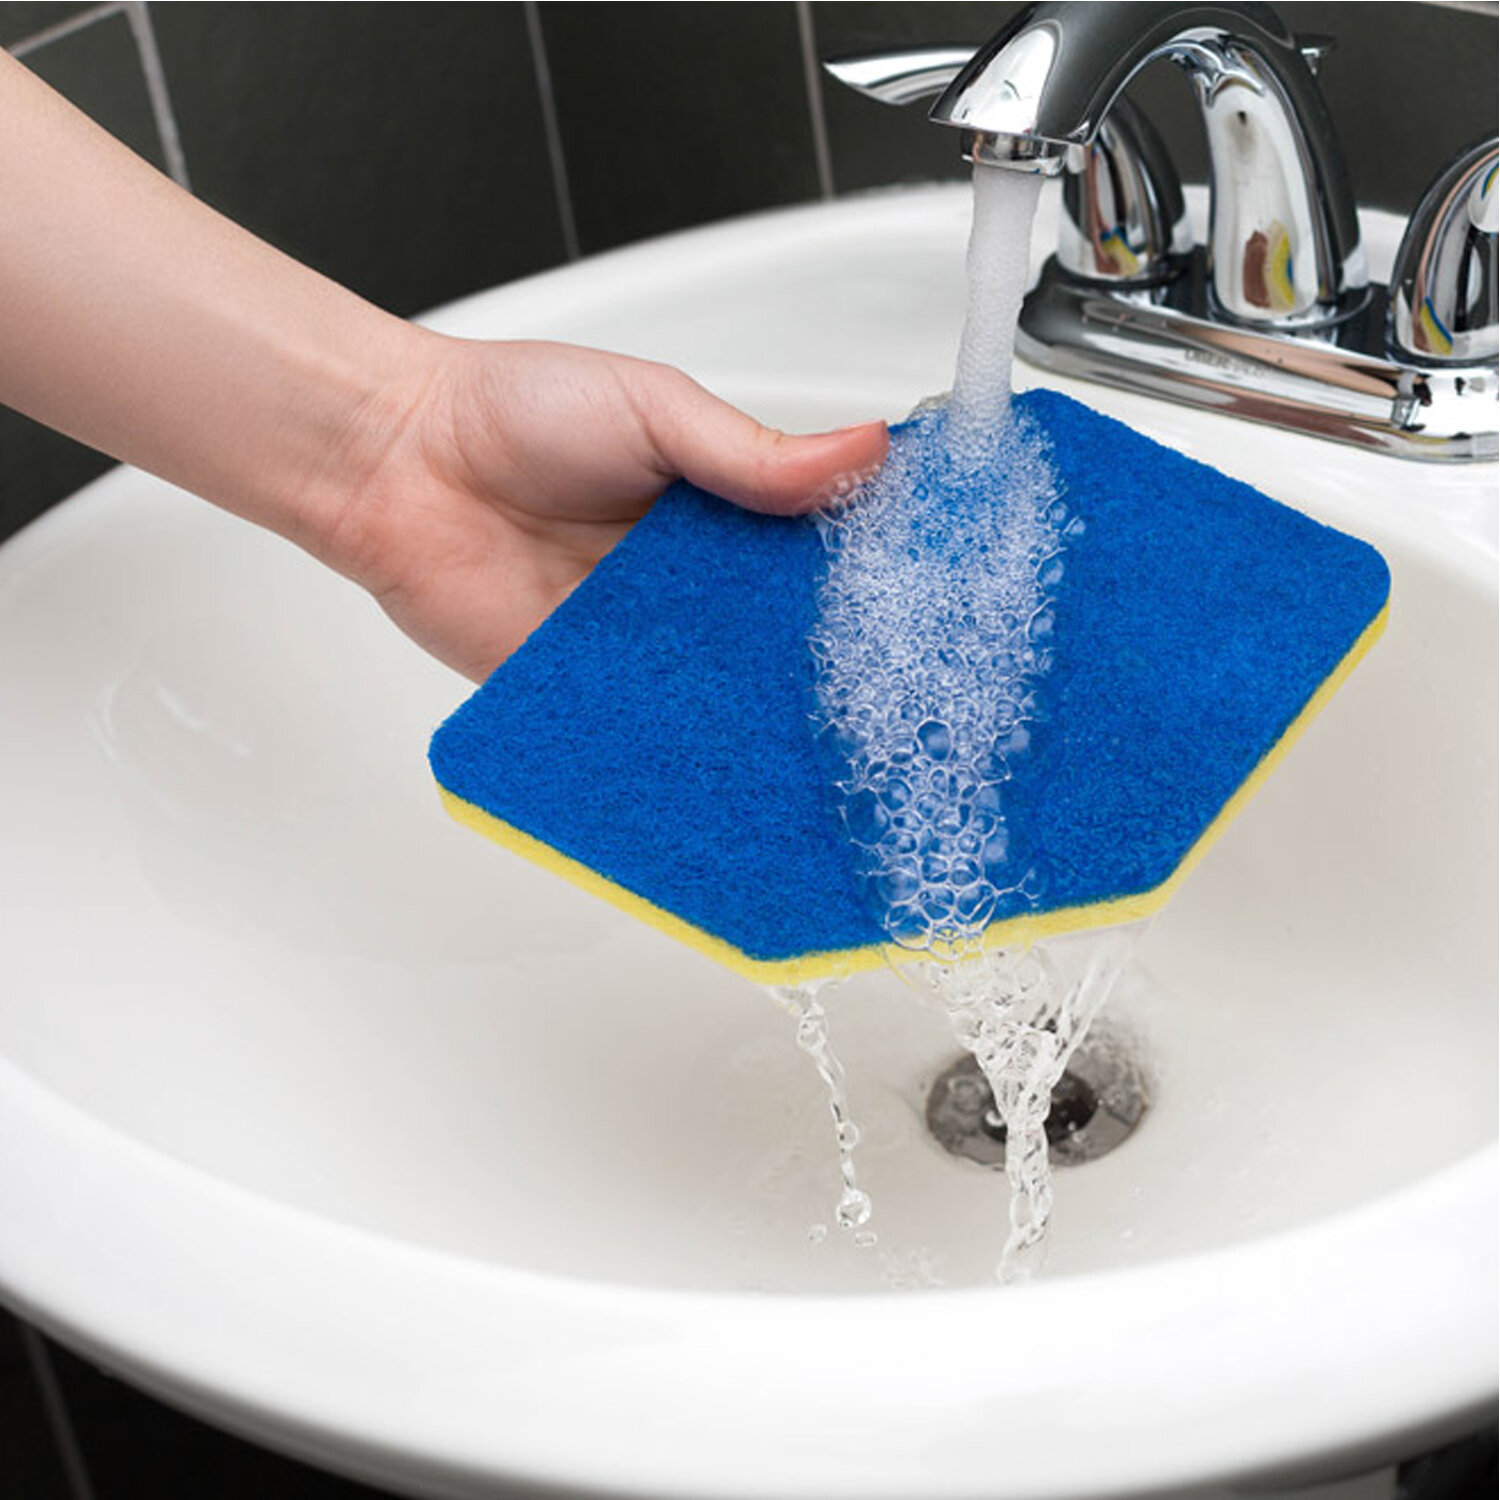 Vileda's Bath Magic Mop makes it easy to clean your shower - only $10 on